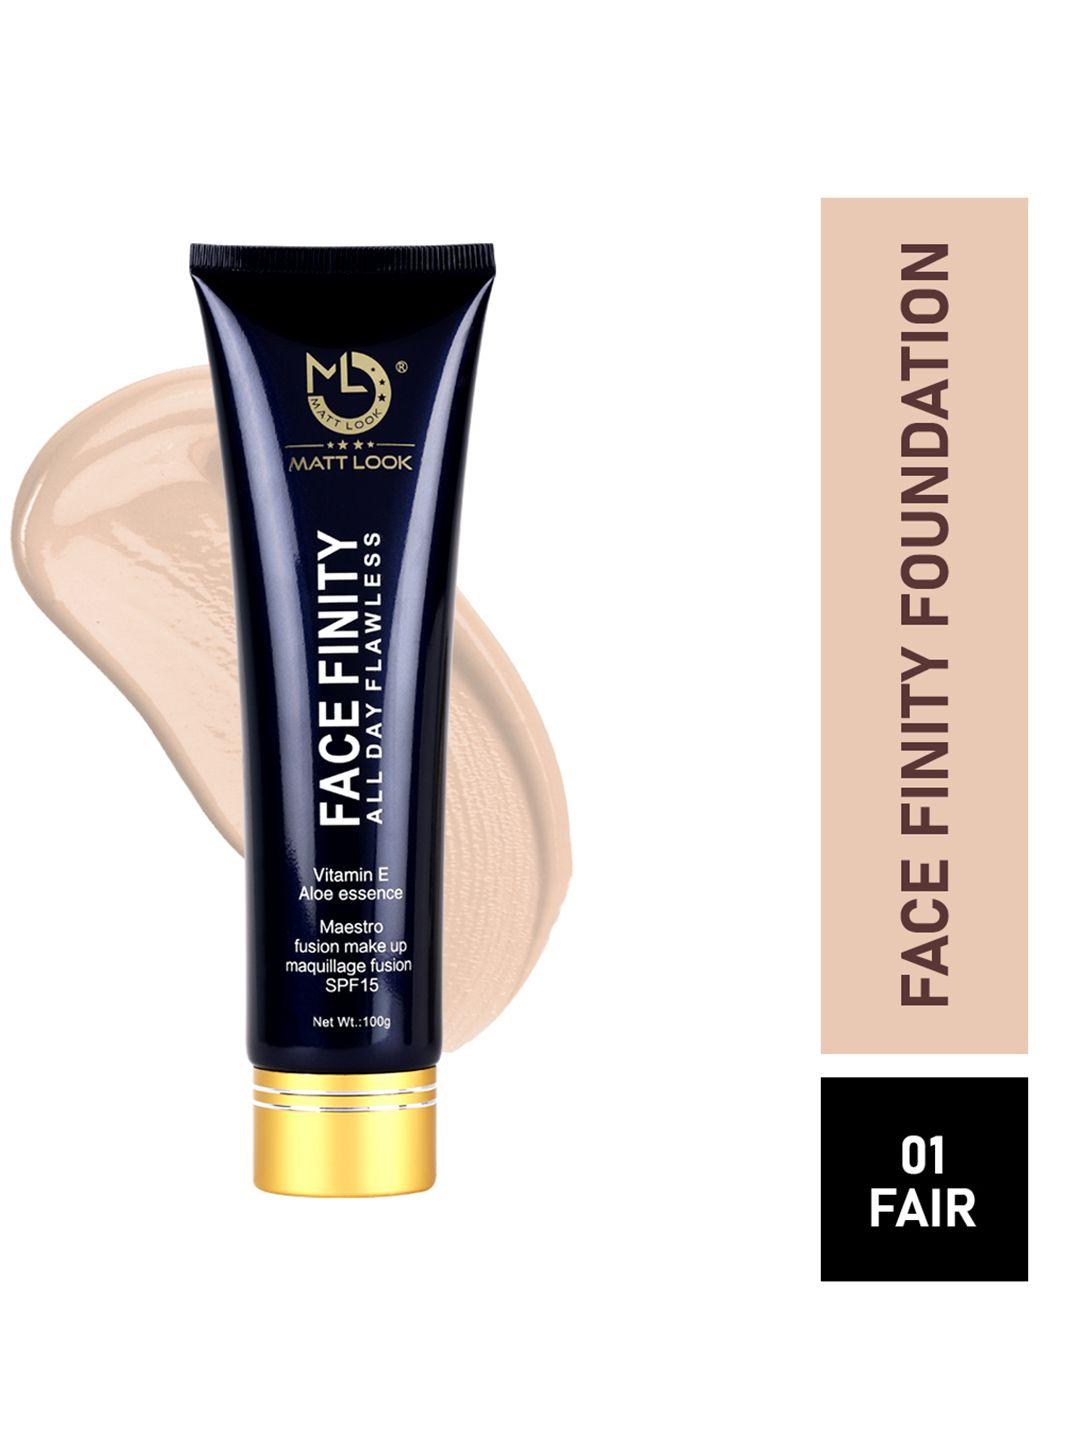 mattlook face finity all day flawless - meastro fusion make up foundation - spf15 - fair